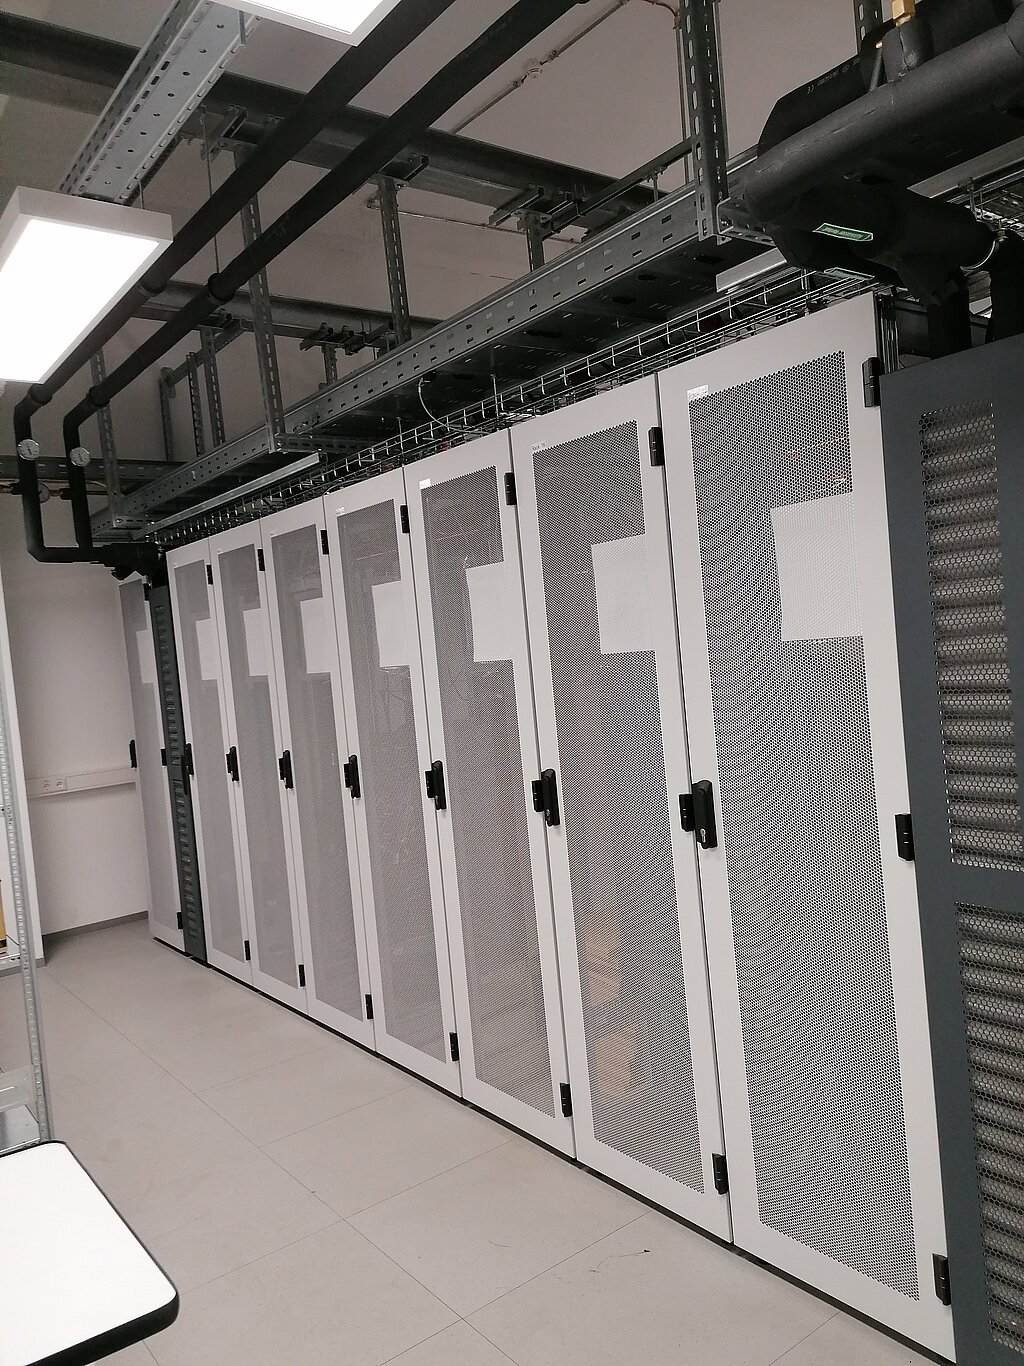 Switch cabinets of the data center